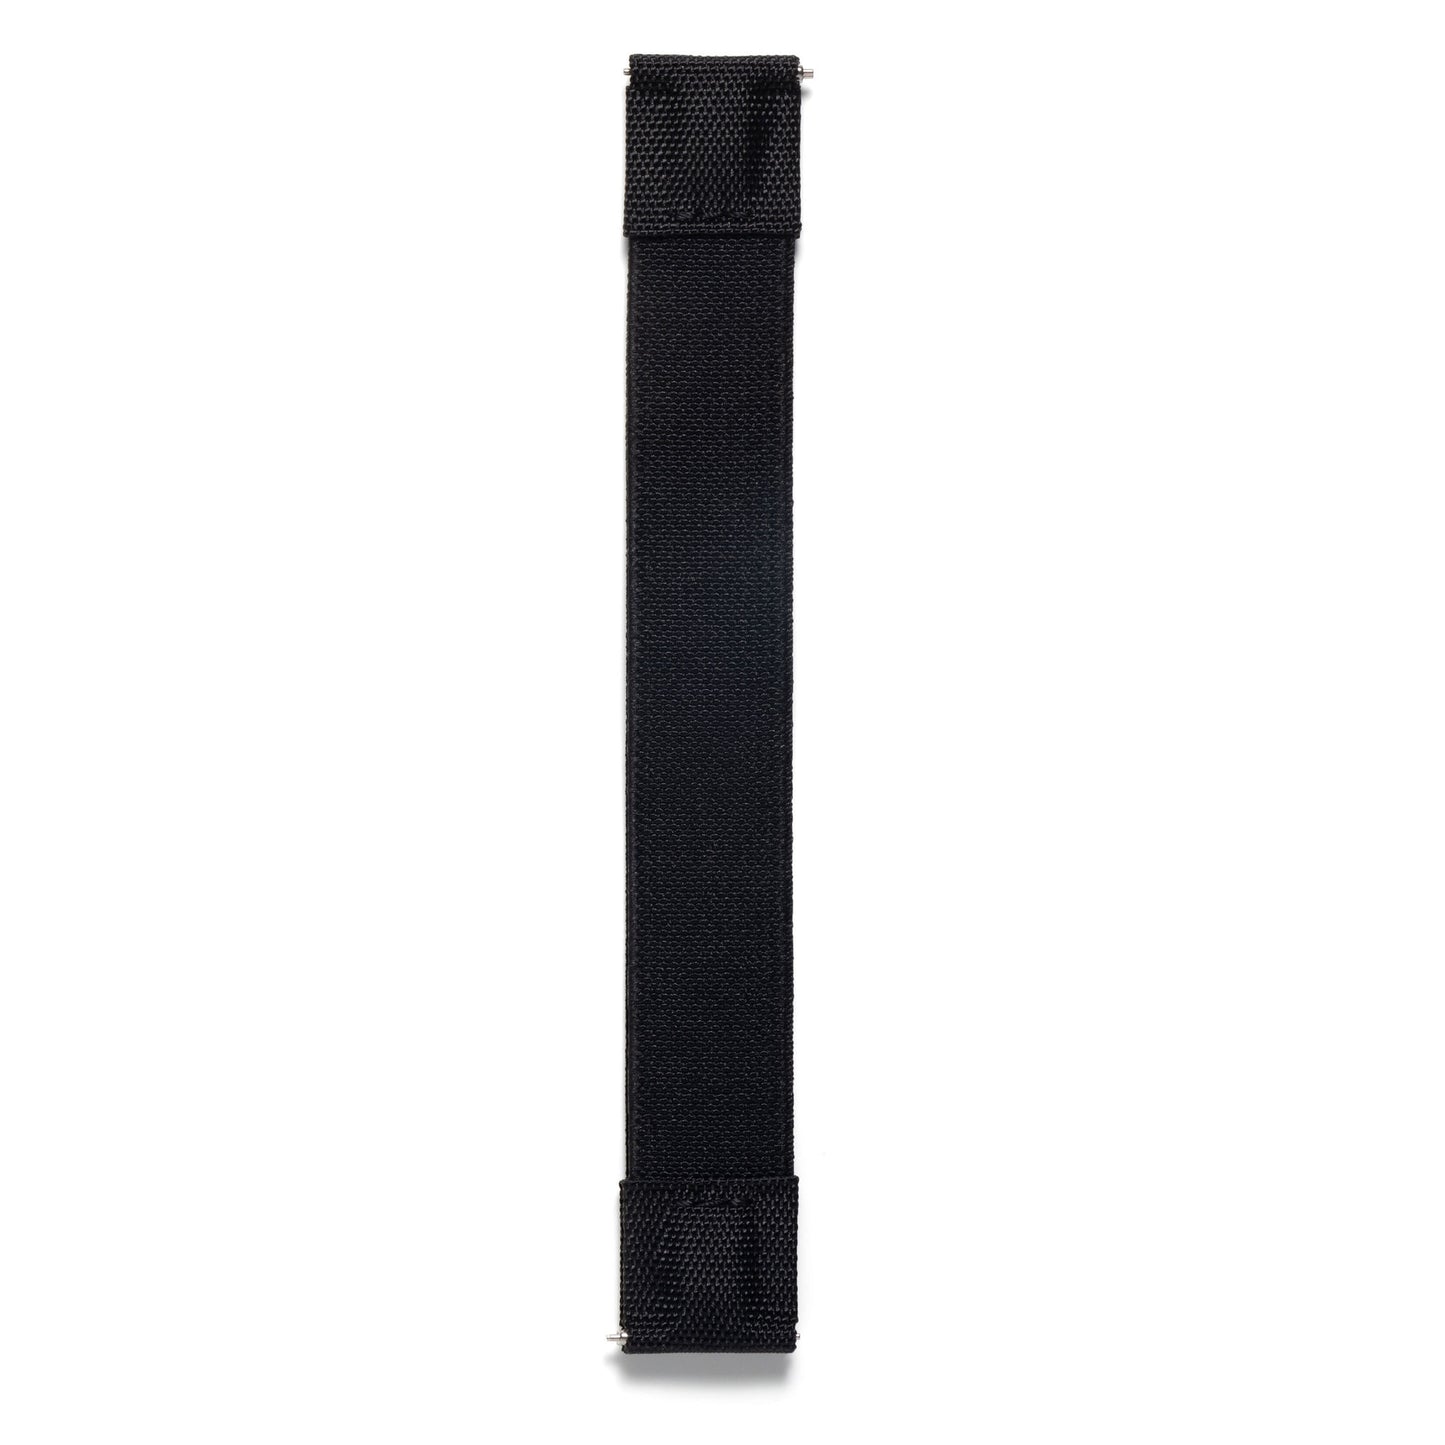 BLACK ELASTIC - PREMIUM FABRIC HYBRID WATCH STRAP for MOST WATCHES WITH A 20MM LUG WIDTH